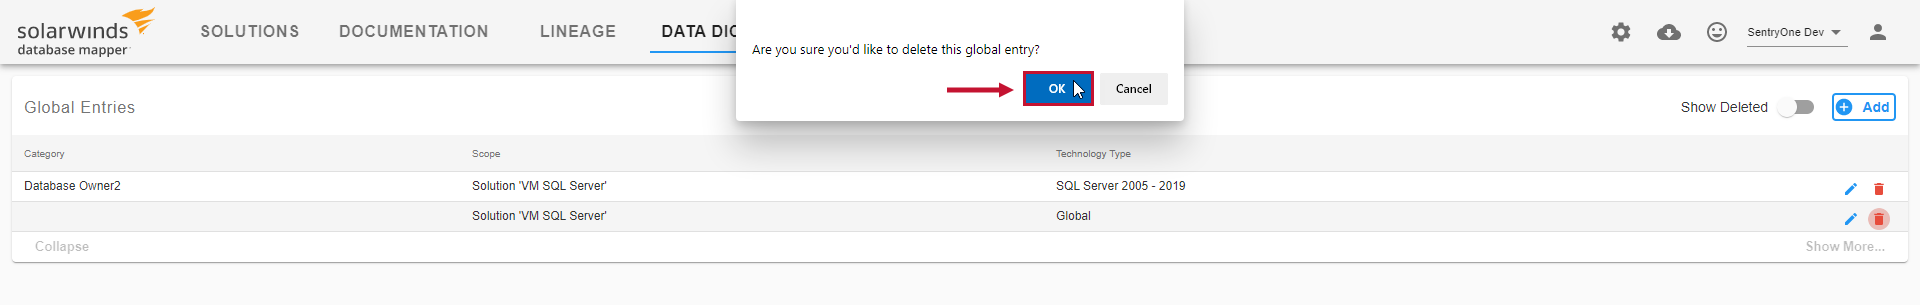 Database Mapper Data Dictionary Global Entries Confirm Delete